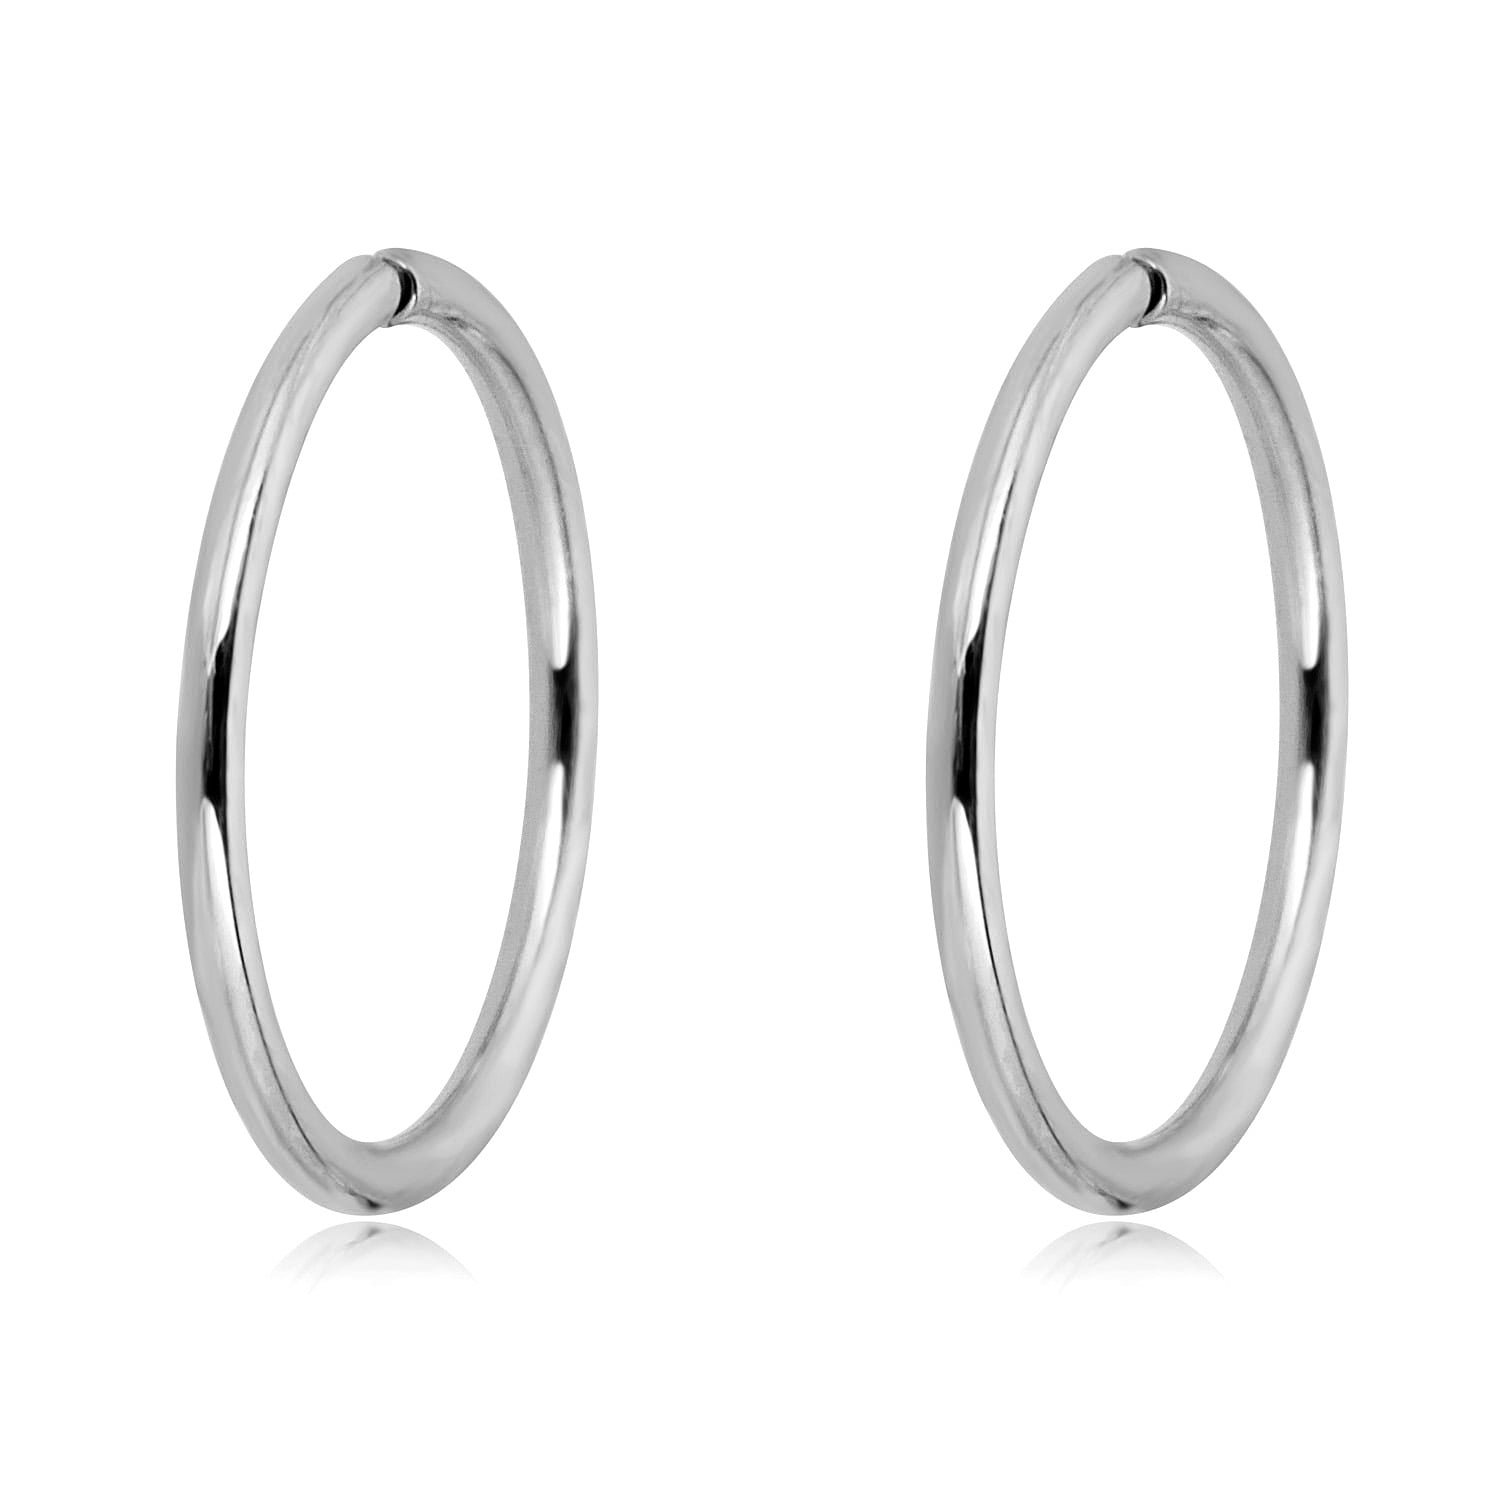 AVORA 10K White Gold 10mm Endless Continuous No-Gap Polished Hoop ...